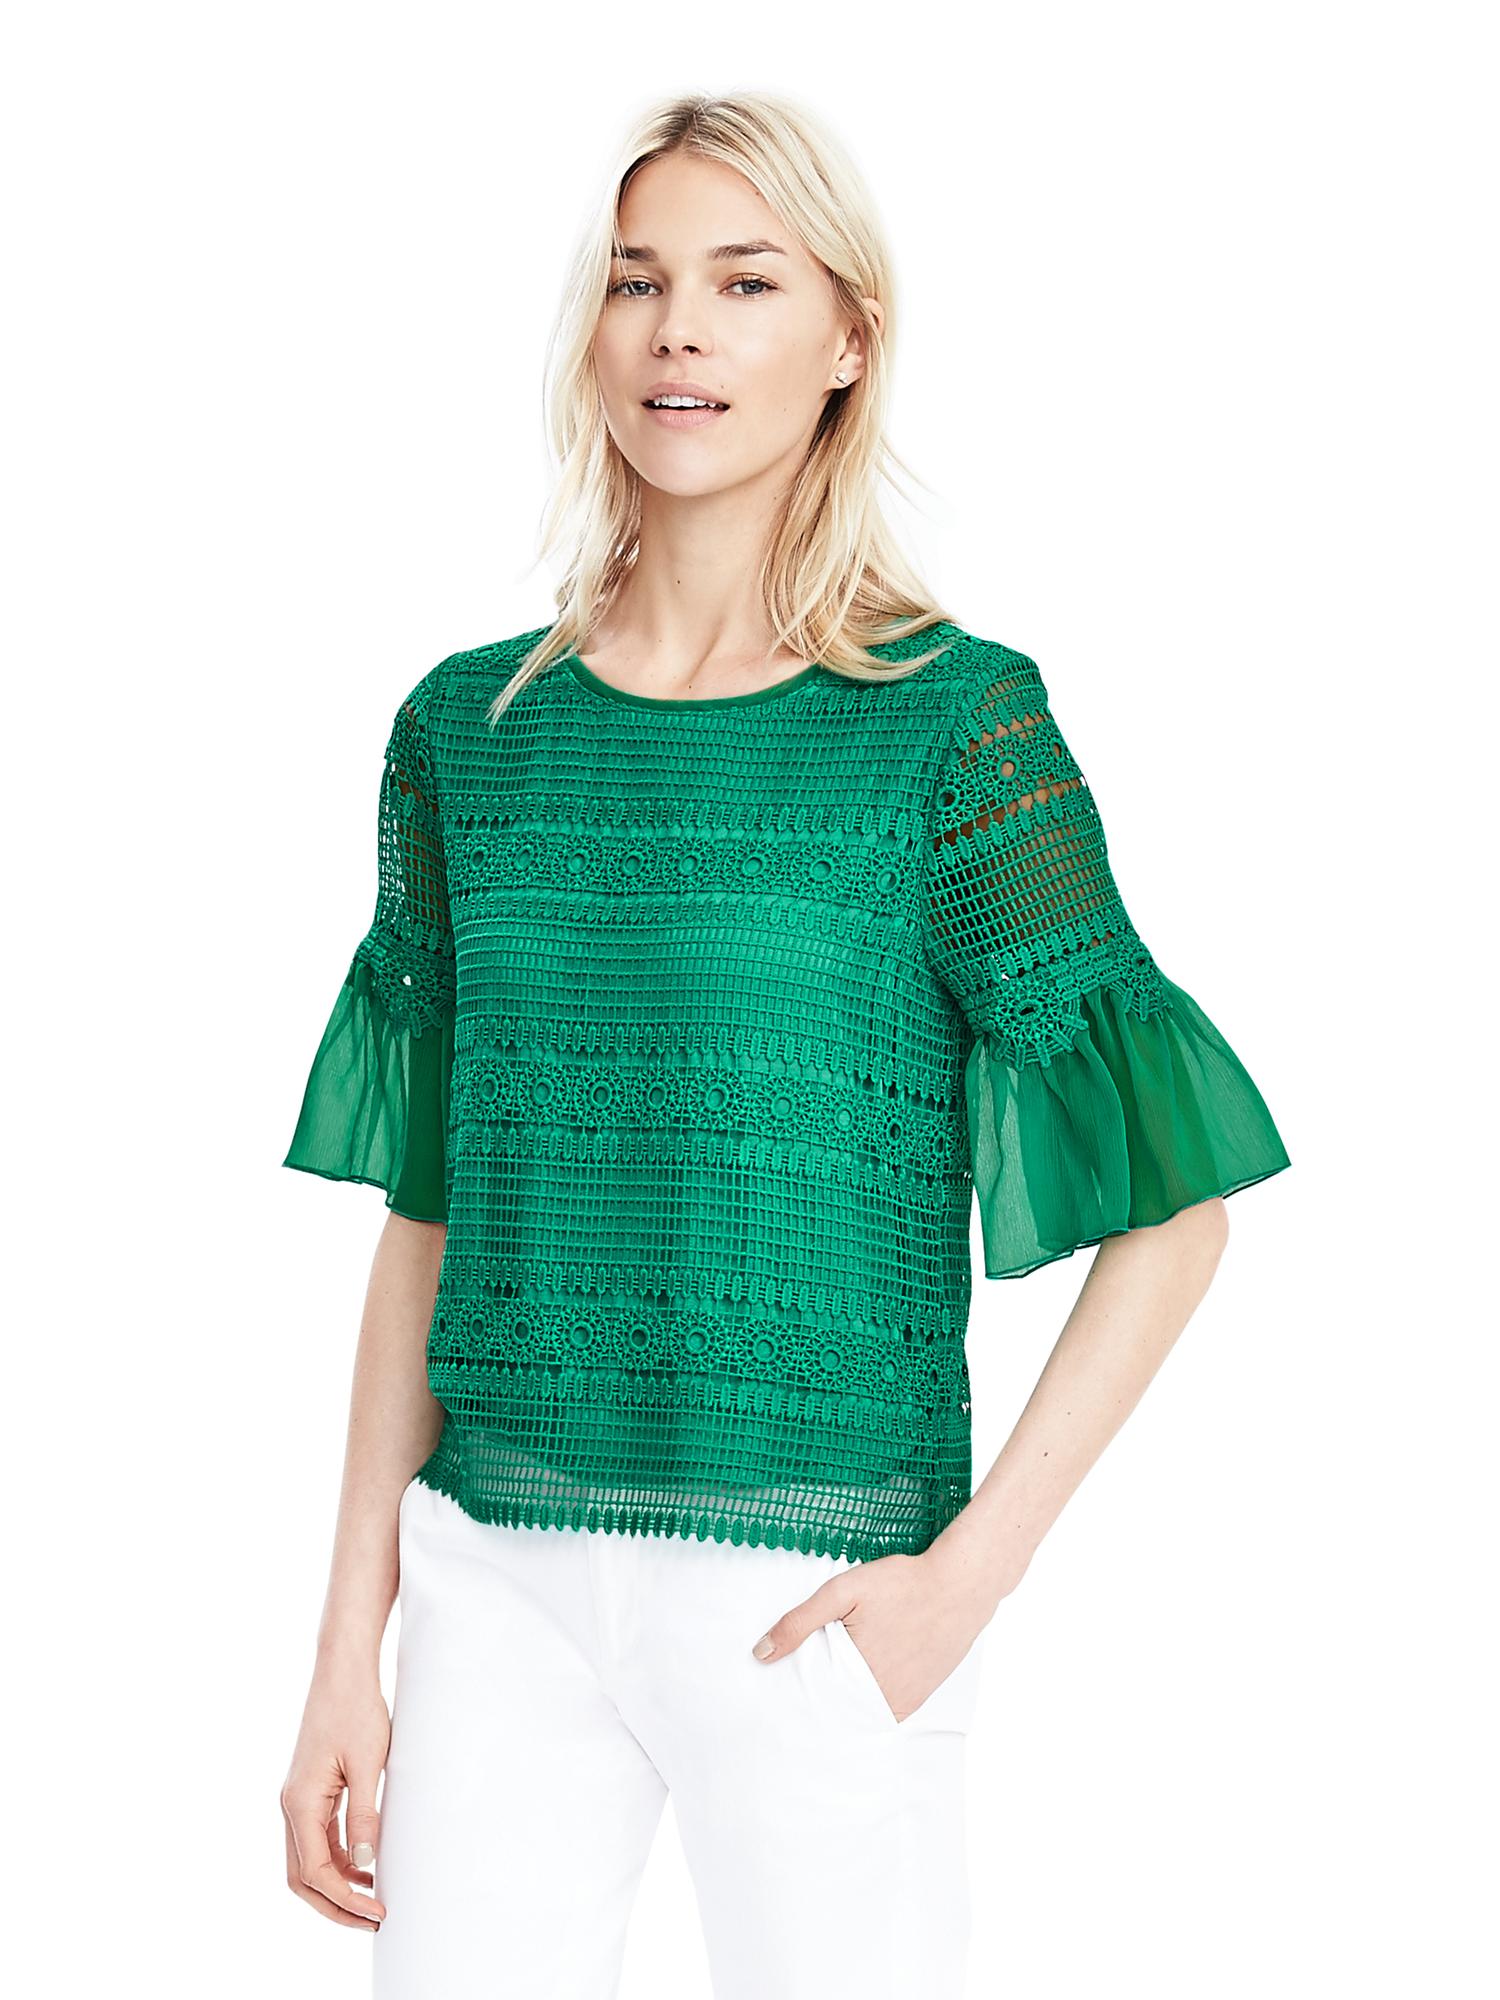 Short-Sleeve Lace Top